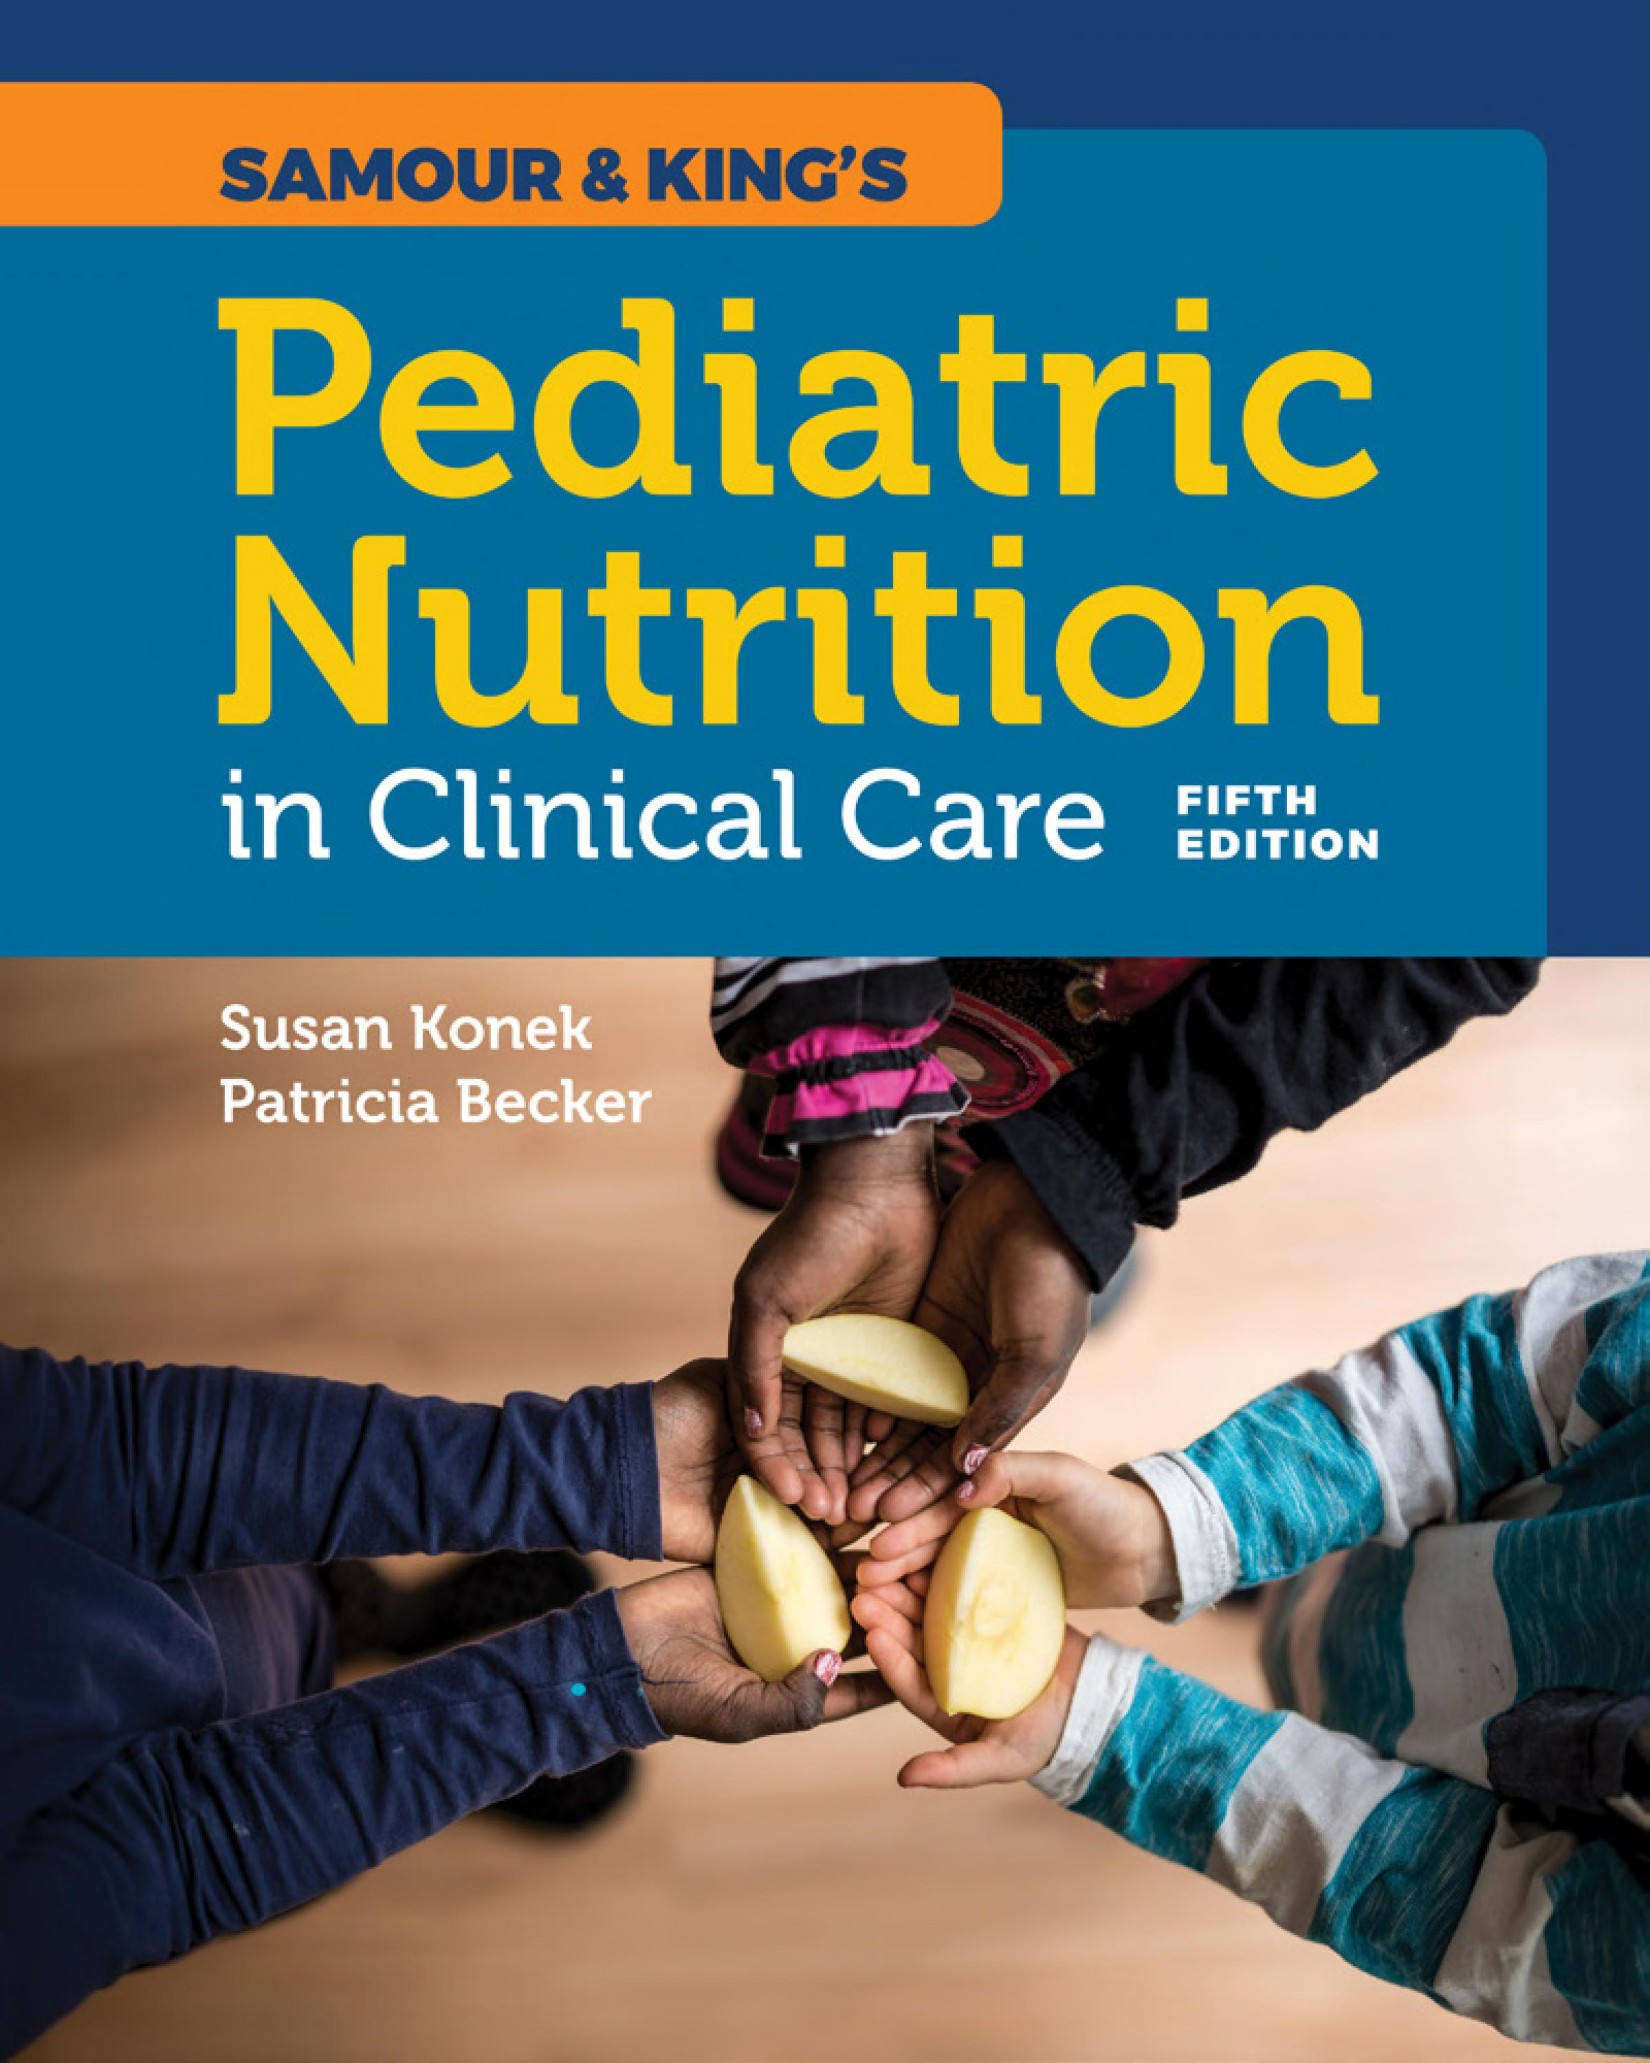 Samour &amp; King's Pediatric Nutrition in Clinical Care